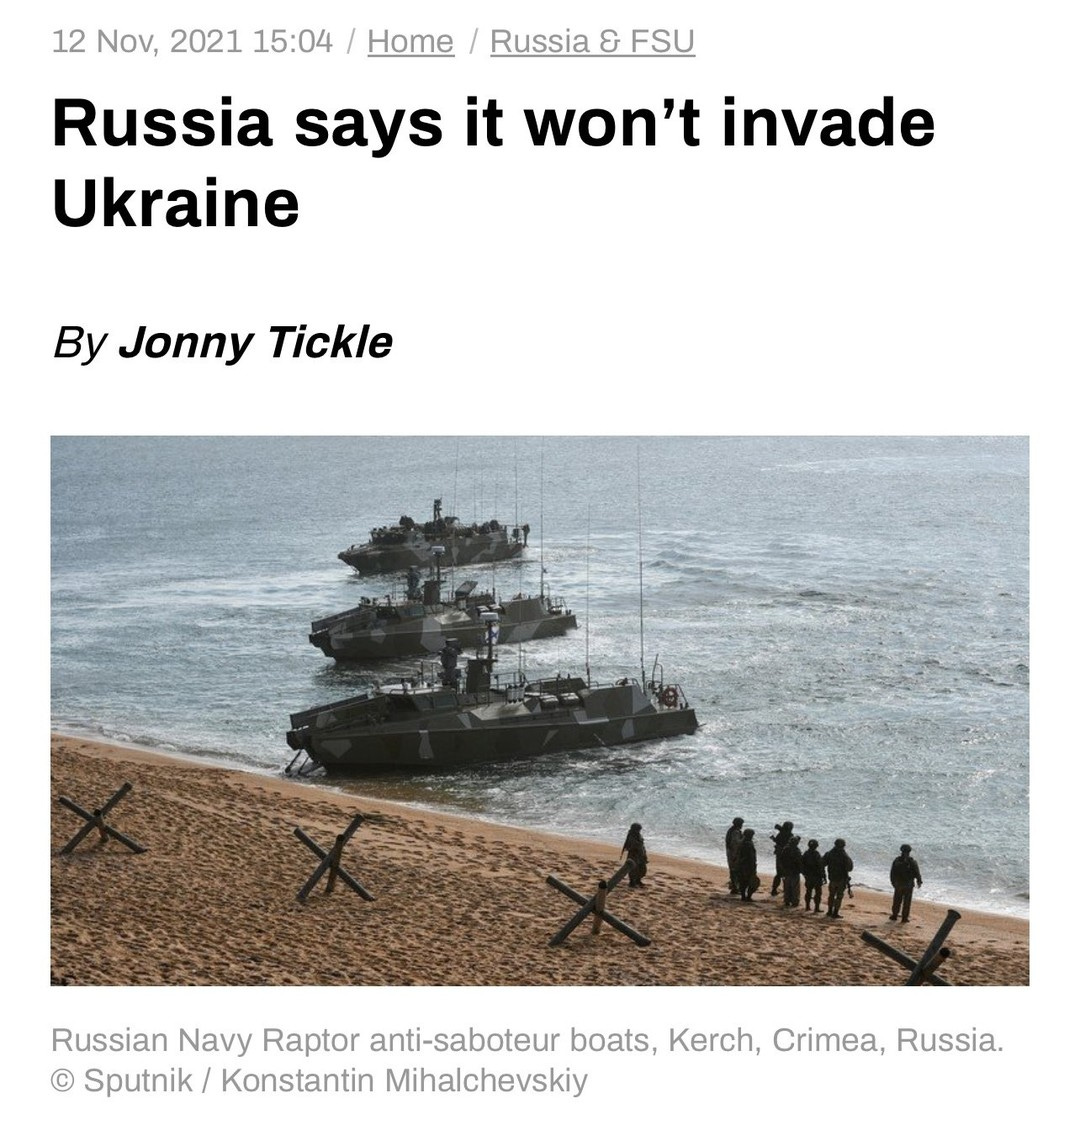 Photo by ian bremmer on March 28, 2024. May be an image of 6 people and text that says 'Home Russia& FSU 12 Nov, 2021 15:04 Russia says it won't invade Ukraine By Jonny Tickle Russian Navy Raptor anti-saboteur boats, Kerch, Crimea, Russia. Sputnik/ Konstantin Mihalchevskiy'.